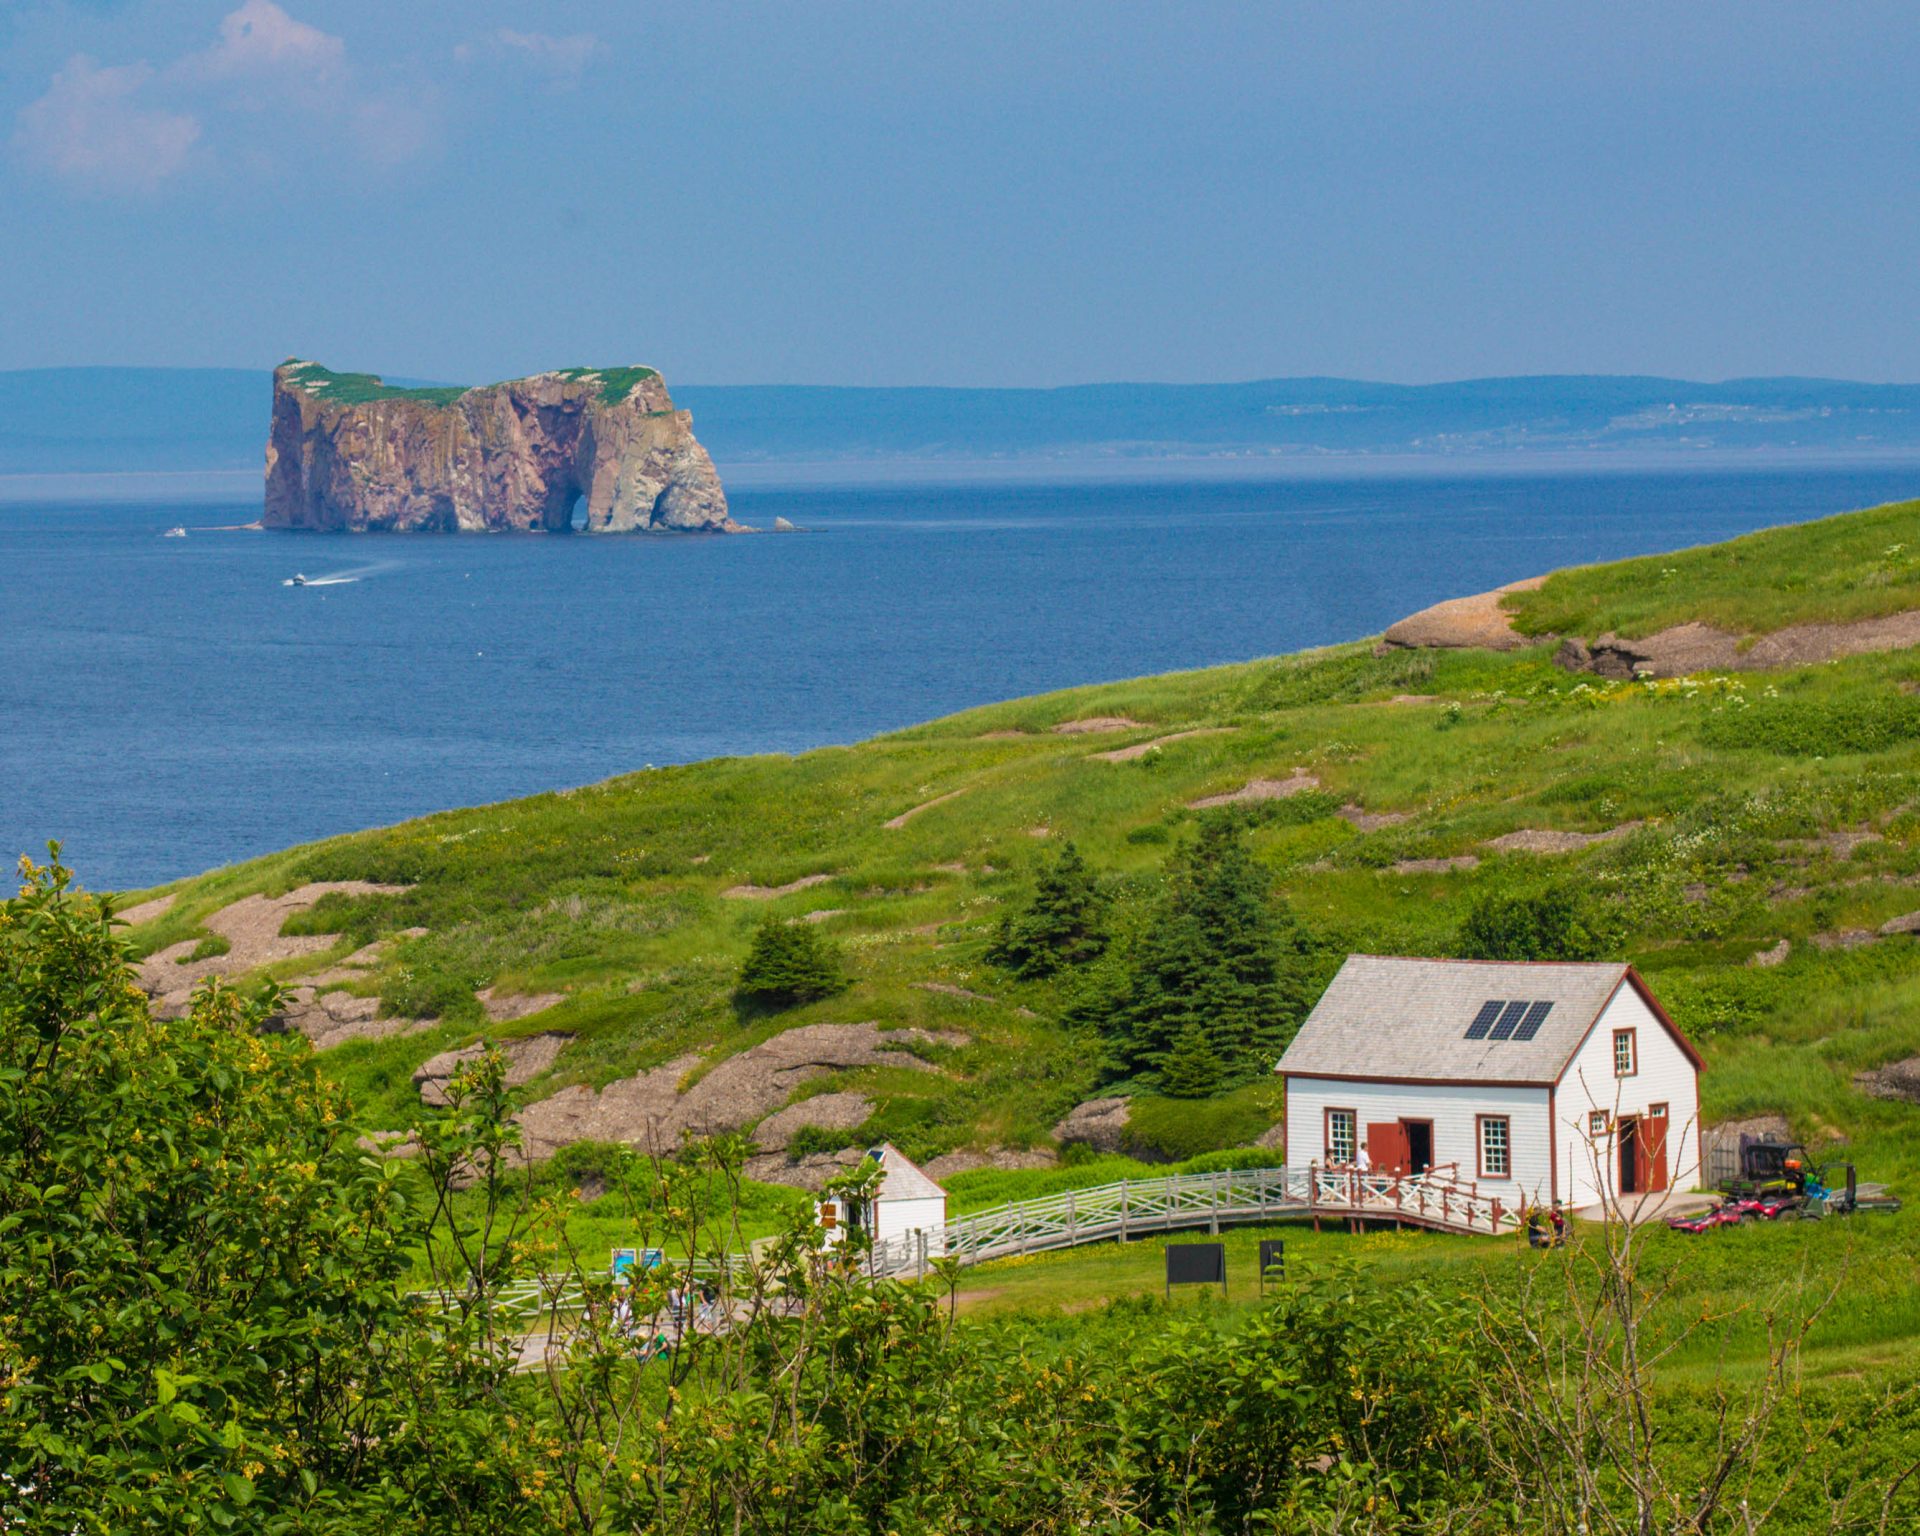 A colorful farmhouse on Bonaventure Island and Perce rock in the distance